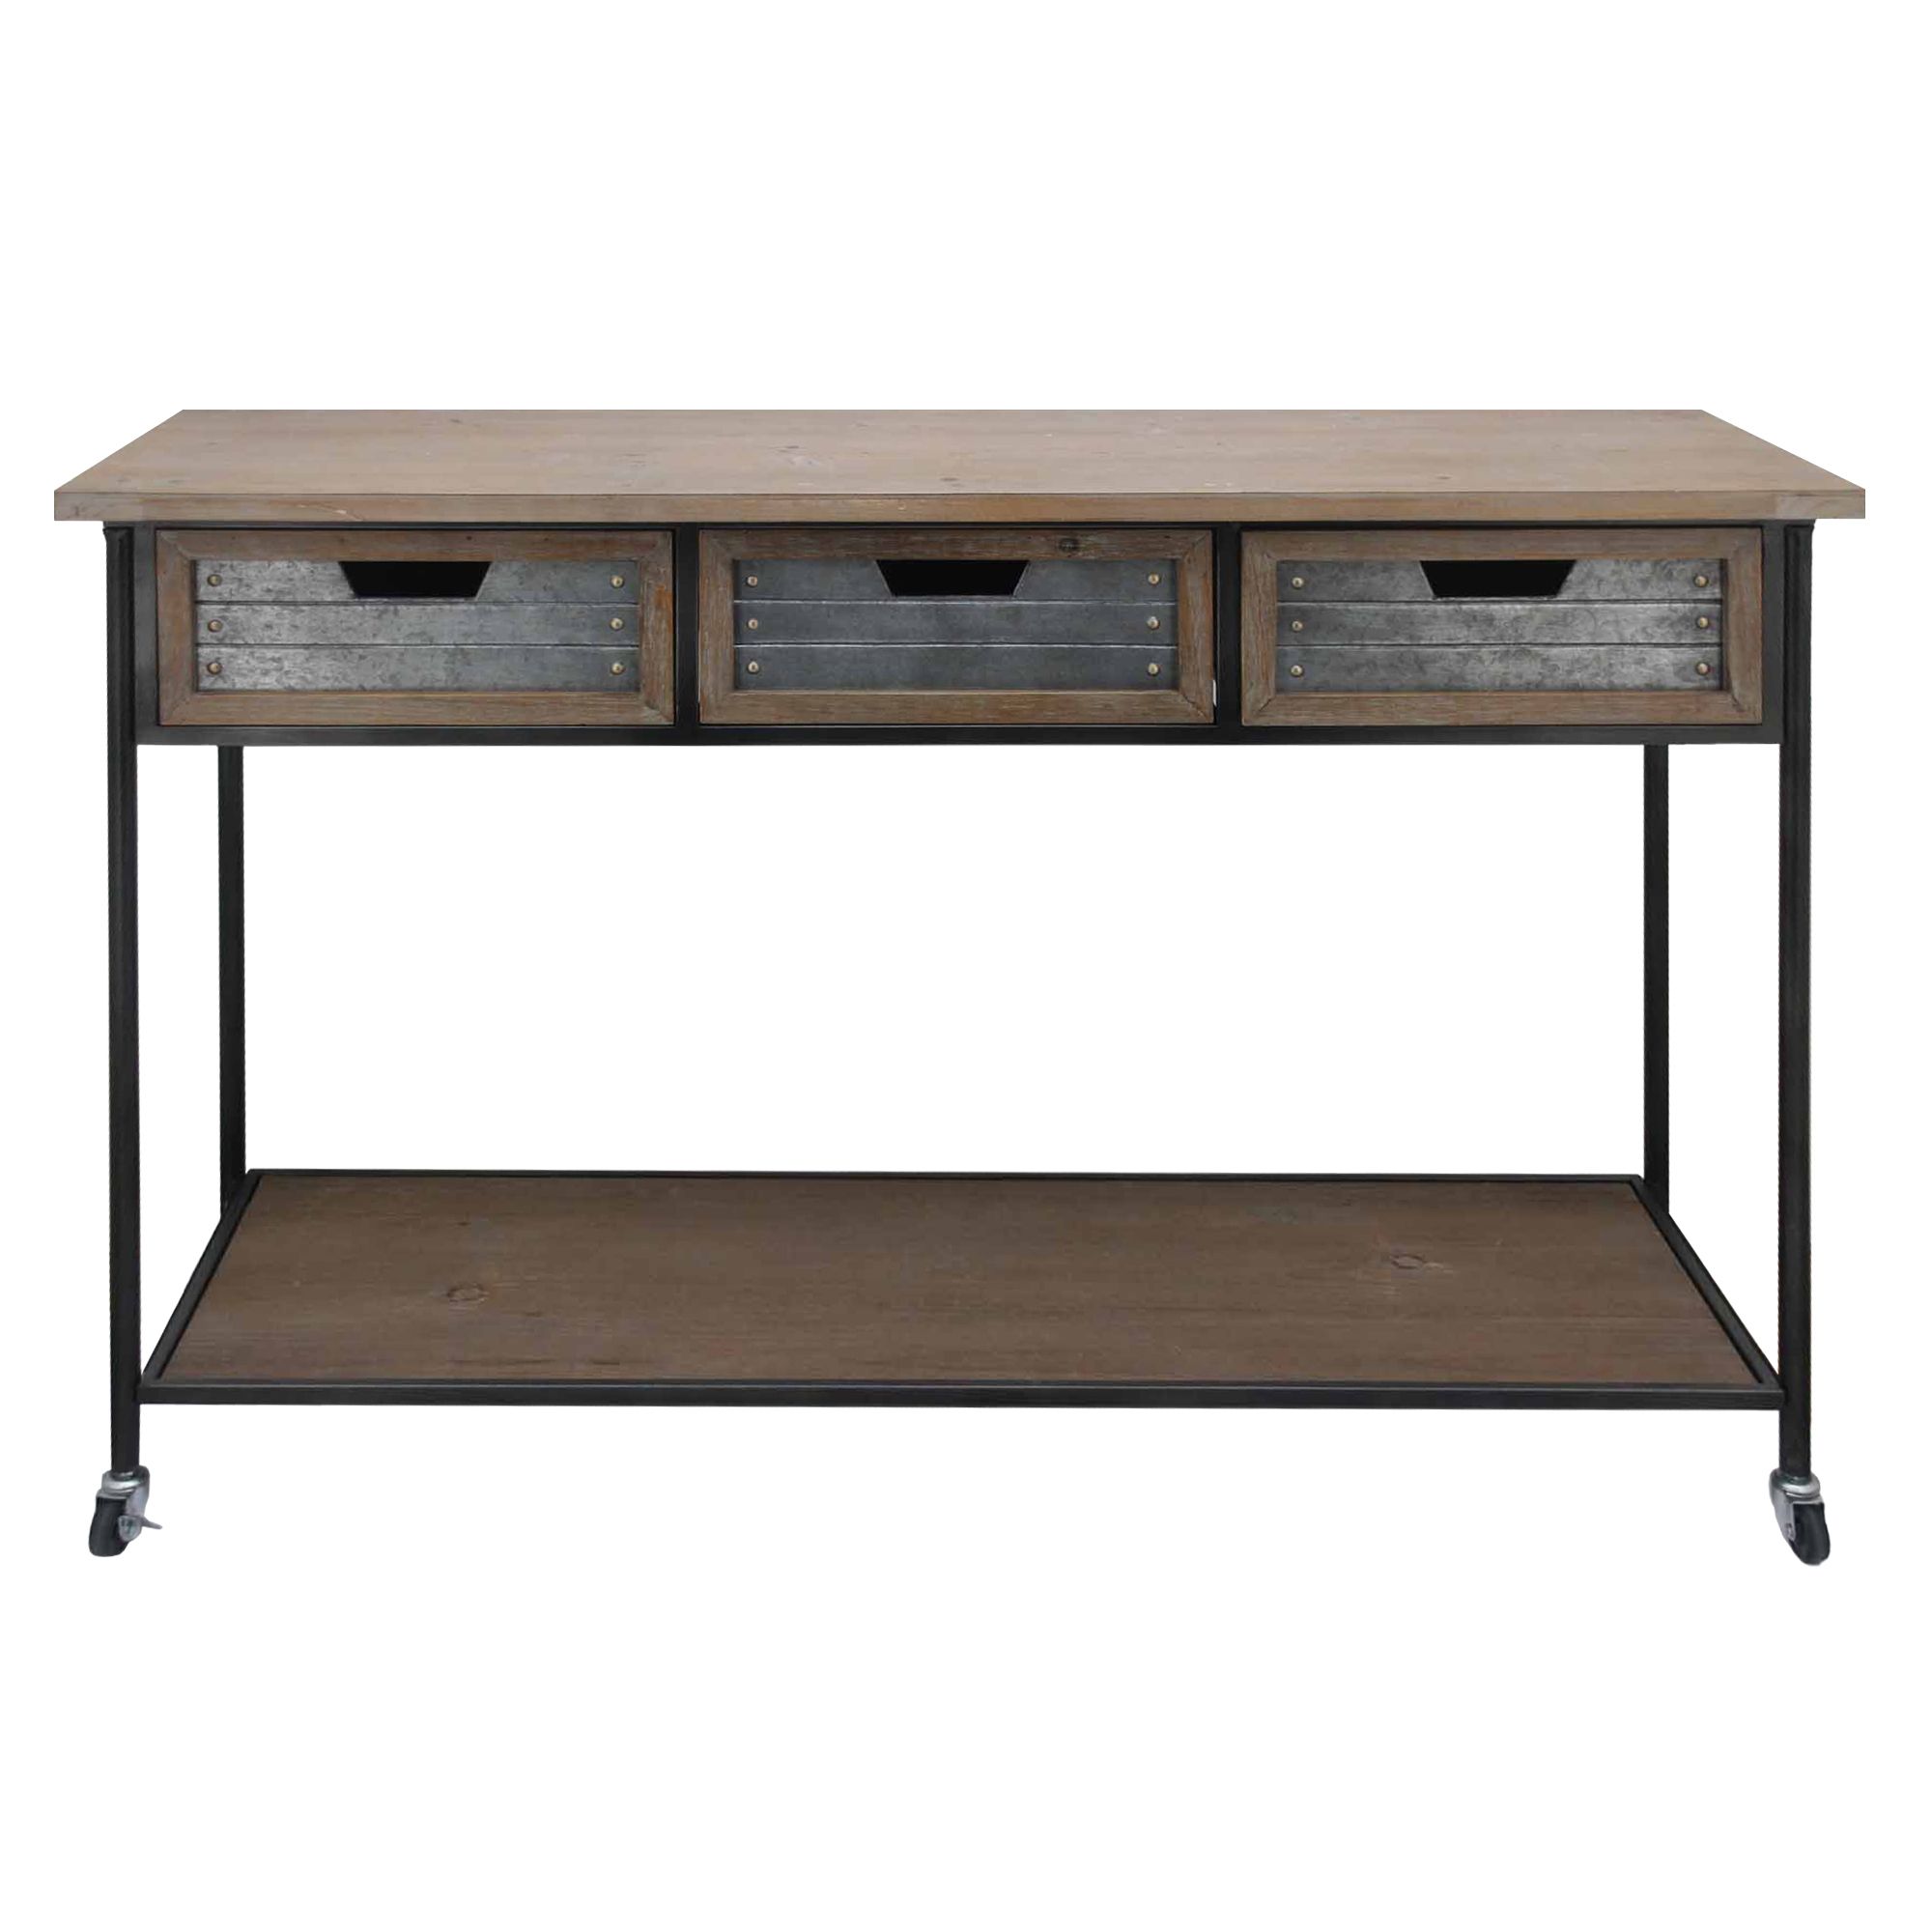 Caster Supported 3 Drawer Wood And Metal Console Table, Brown And Black Inside Brown And Matte Black 3 Drawer Desks (View 15 of 15)